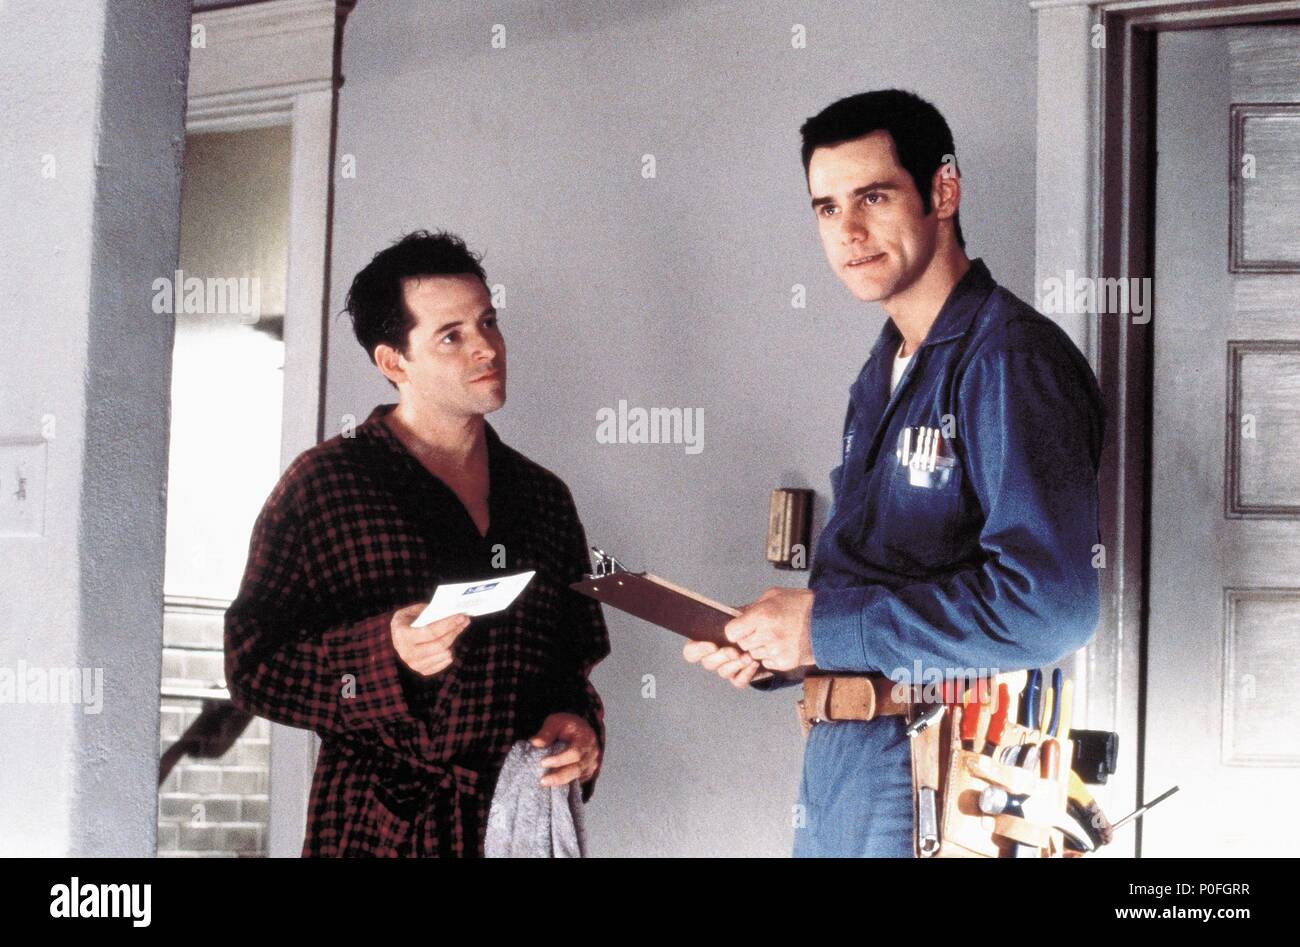 Original Film Title: THE CABLE GUY.  English Title: THE CABLE GUY.  Film Director: BEN STILLER.  Year: 1996.  Stars: JIM CARREY; MATTHEW BRODERICK. Credit: COLUMBIA TRI STAR / Album Stock Photo